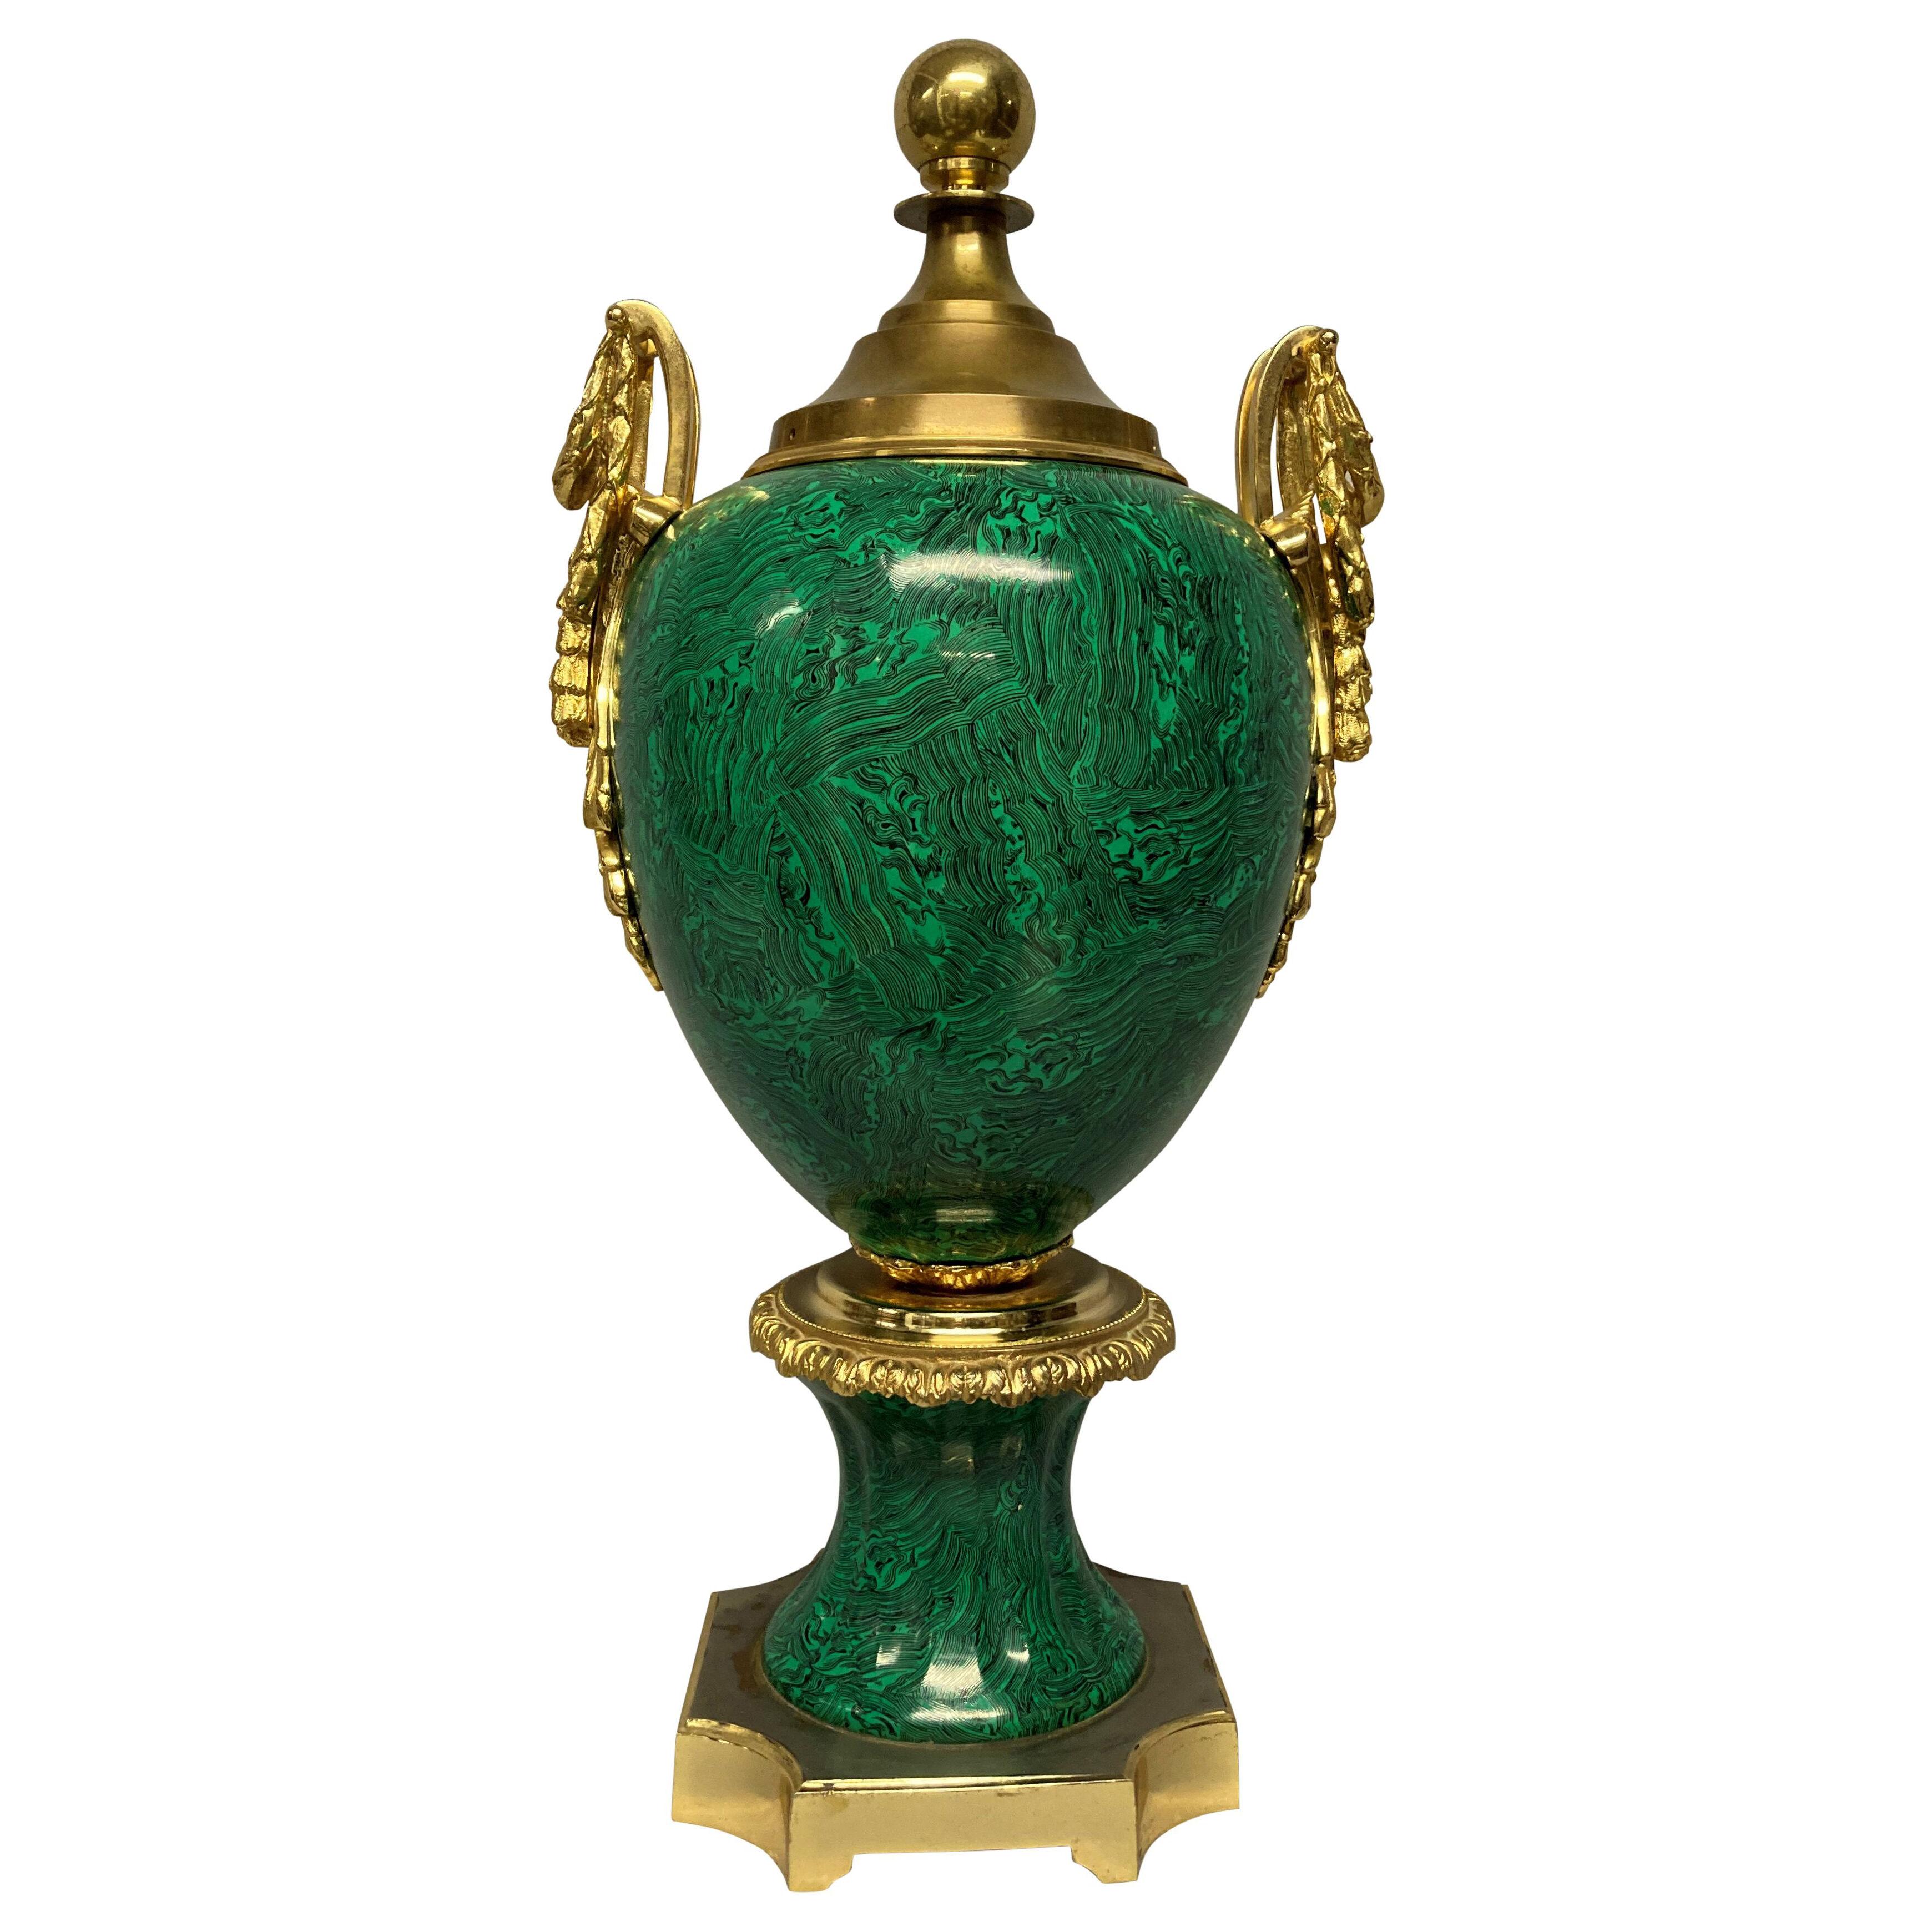 A LARGE MID-CENTURY TWIN HANDLED PORCELAIN URN IN FAUX MALACHITE